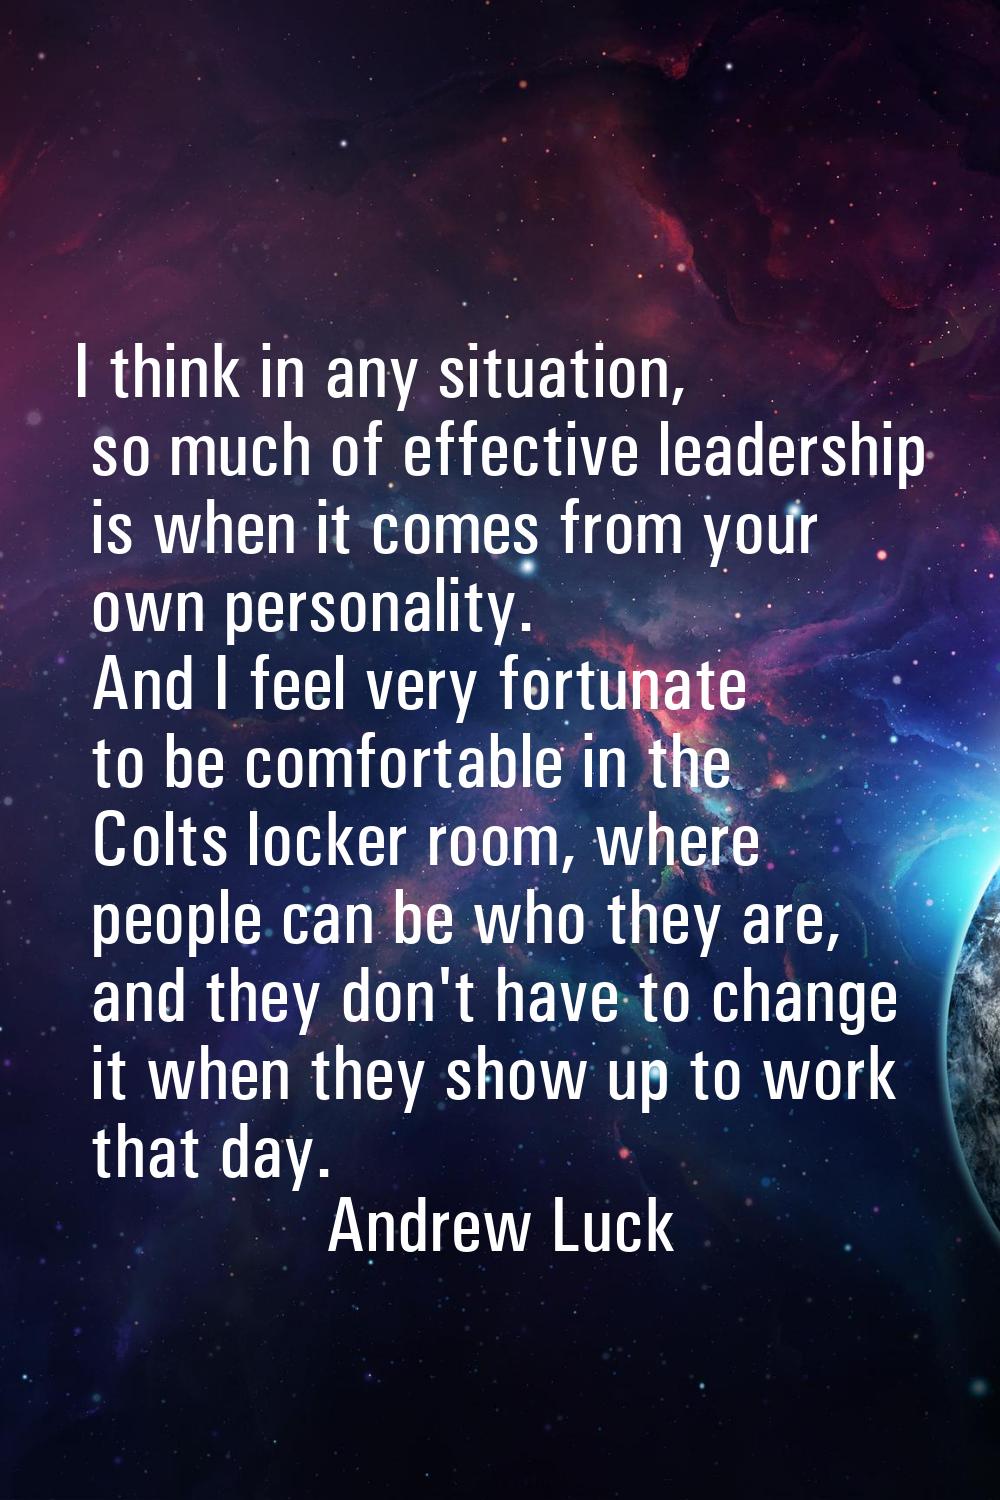 I think in any situation, so much of effective leadership is when it comes from your own personalit